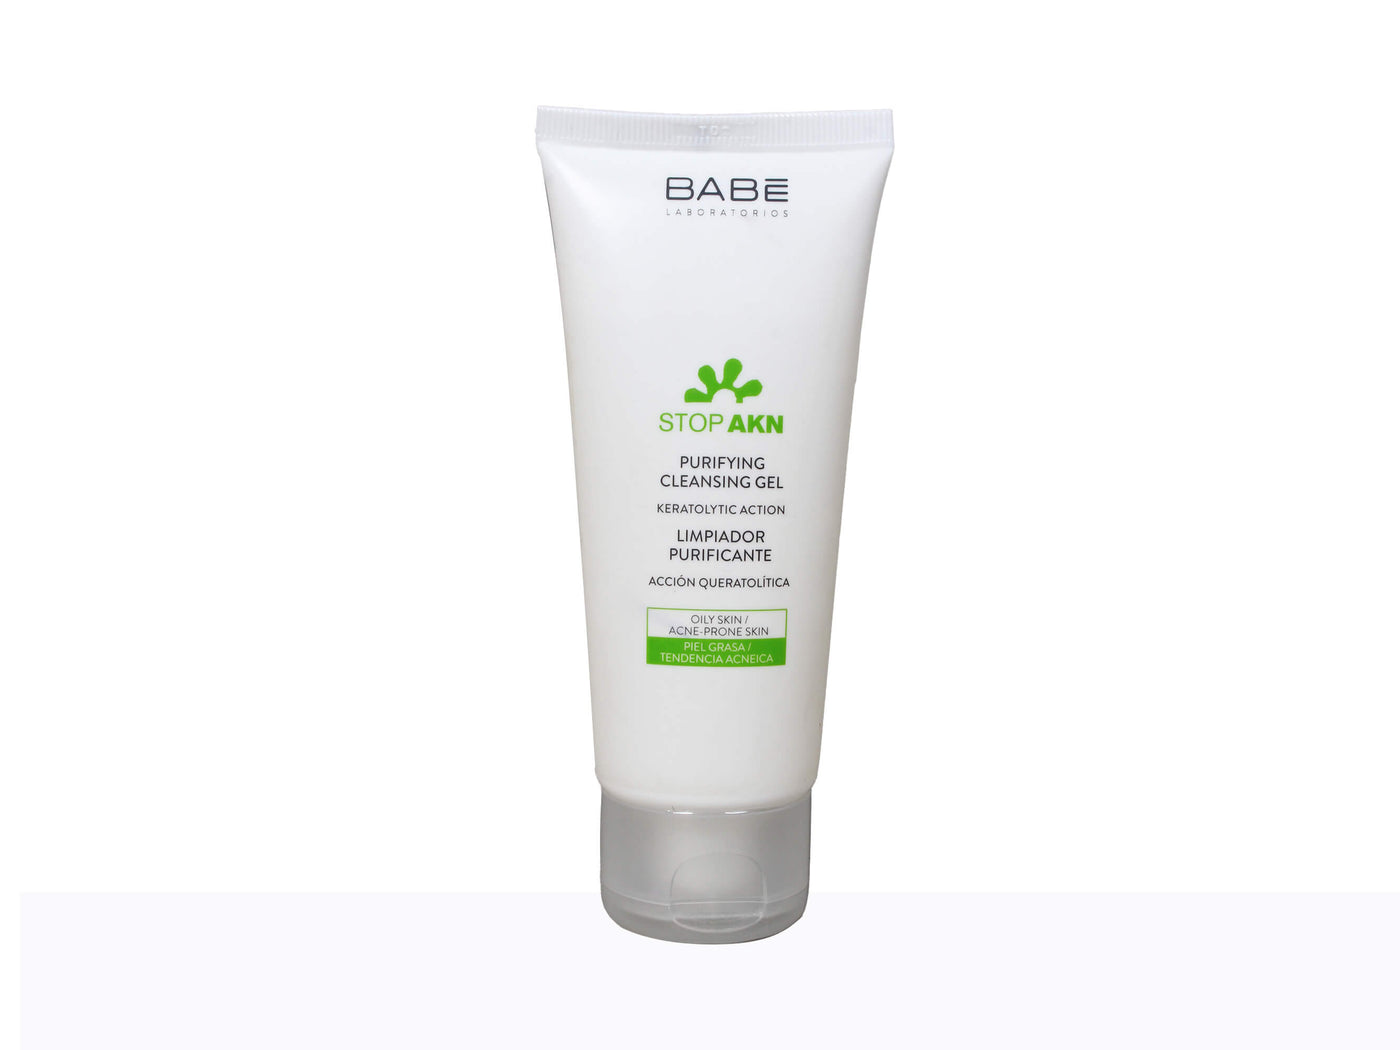 Babe AKN Purifying Cleansing Gel - Clinikally